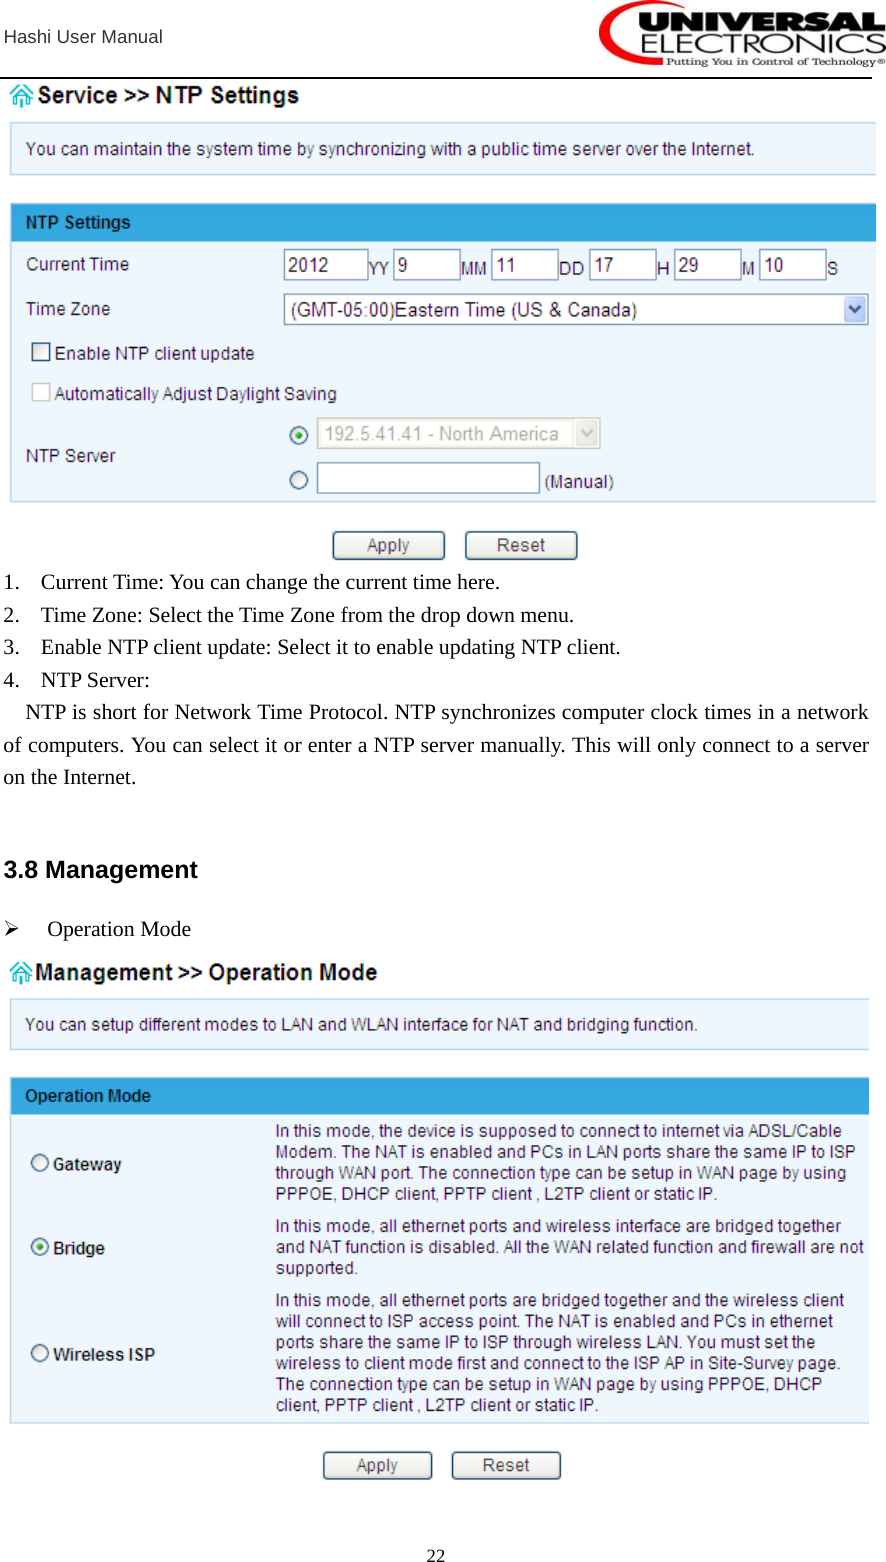  Hashi User Manual  22 1. Current Time: You can change the current time here. 2. Time Zone: Select the Time Zone from the drop down menu. 3. Enable NTP client update: Select it to enable updating NTP client. 4. NTP Server: NTP is short for Network Time Protocol. NTP synchronizes computer clock times in a network of computers. You can select it or enter a NTP server manually. This will only connect to a server on the Internet.  3.8 Management ¾ Operation Mode  